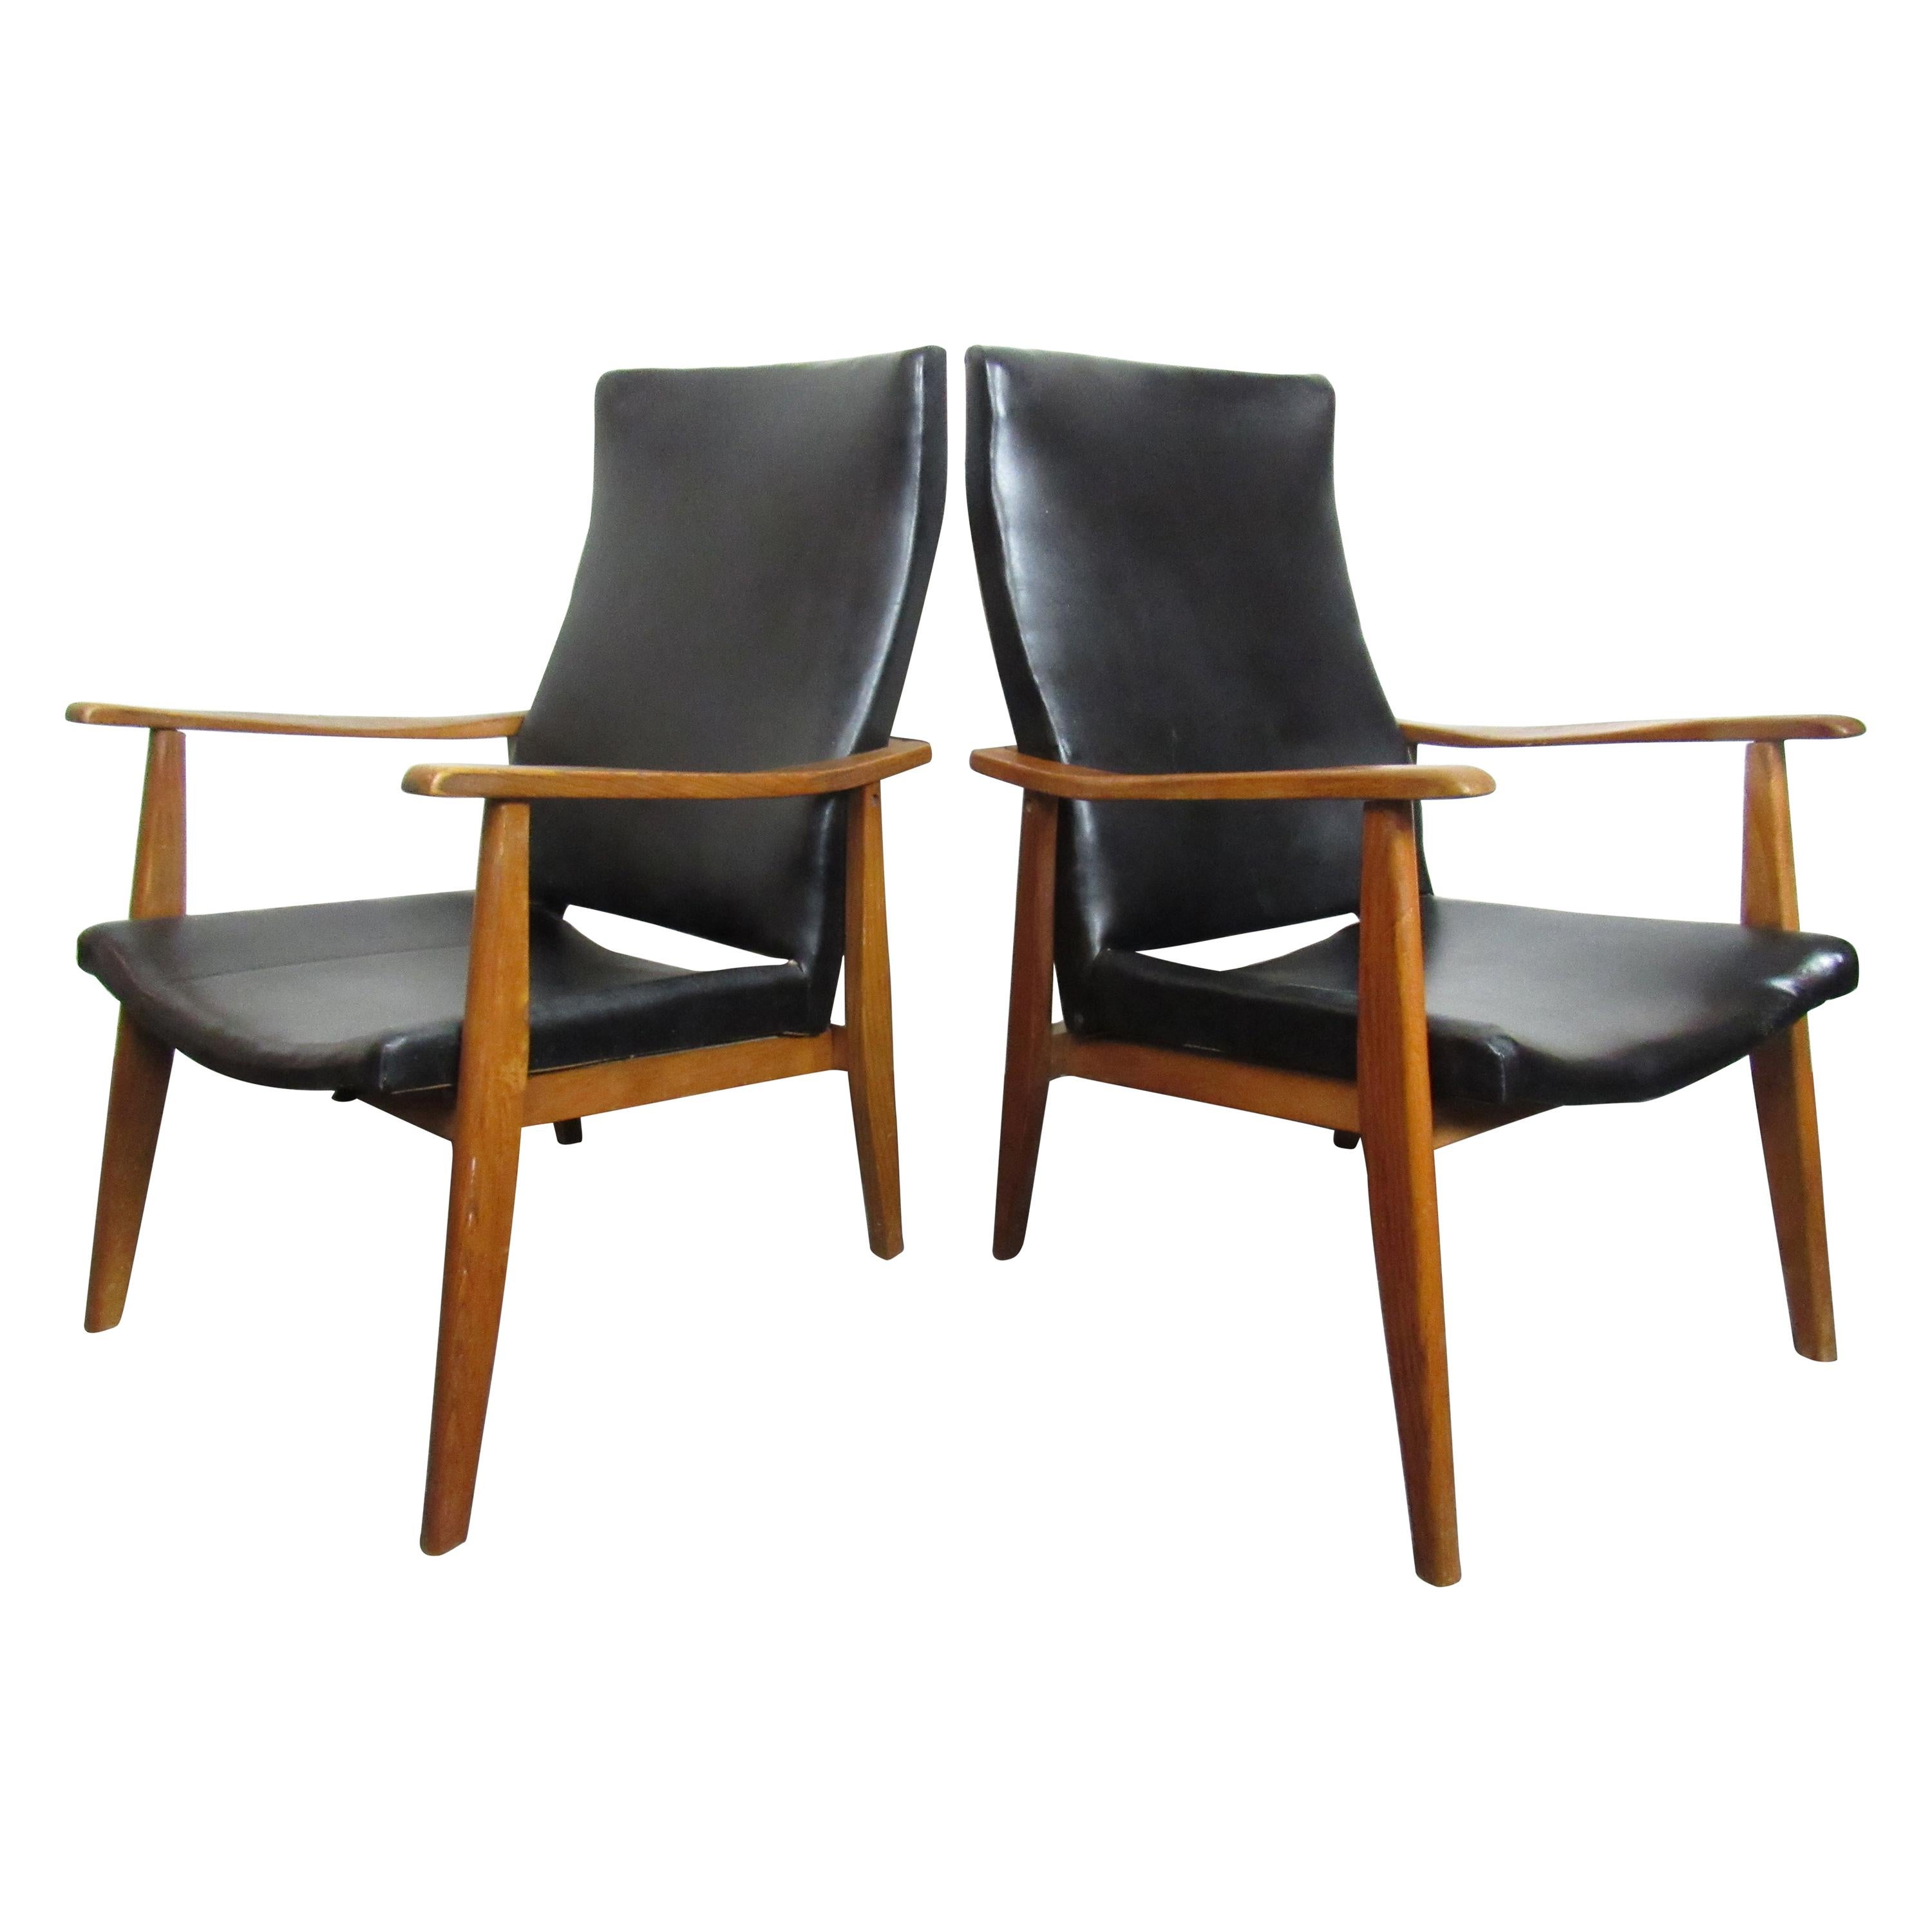 Pair of Mid-Century Modern Vinyl Lounge Chairs For Sale